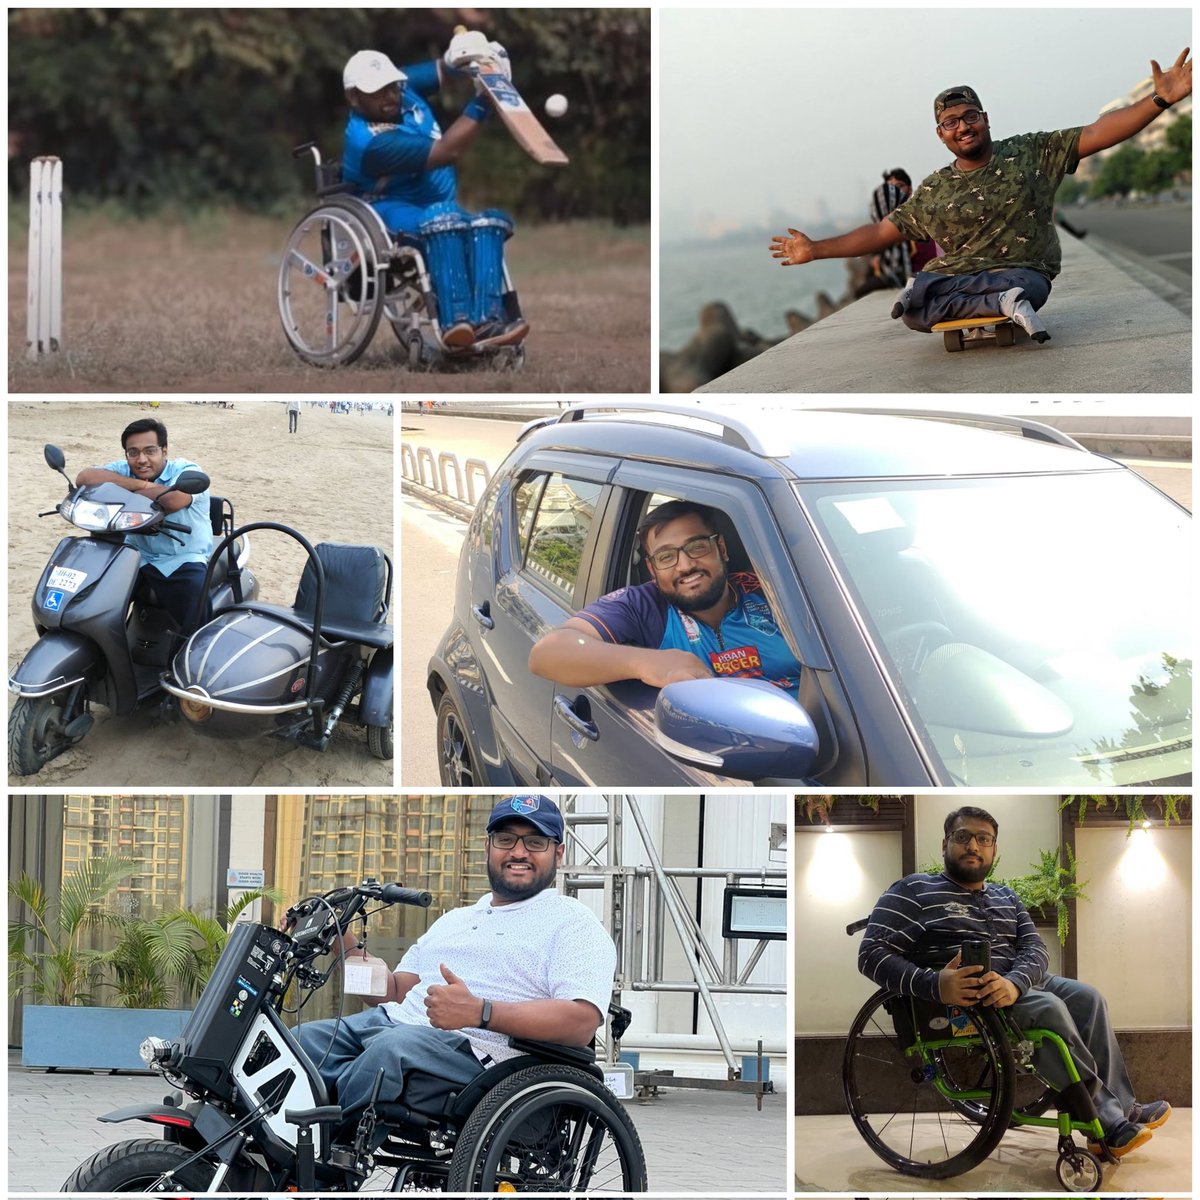 'Rahul On Wheels' ♿❤️🤘🏼

Be Limitless 💪

#rahulonwheels #wheelchair #NeoMotion #independence #freedom #explore #adventure #travel #mobility #fun #wheelcahiraccessible #wheelchairuser #personwithdisability #newhopes #barrierbreakers #motivation #inspiration #outdoor